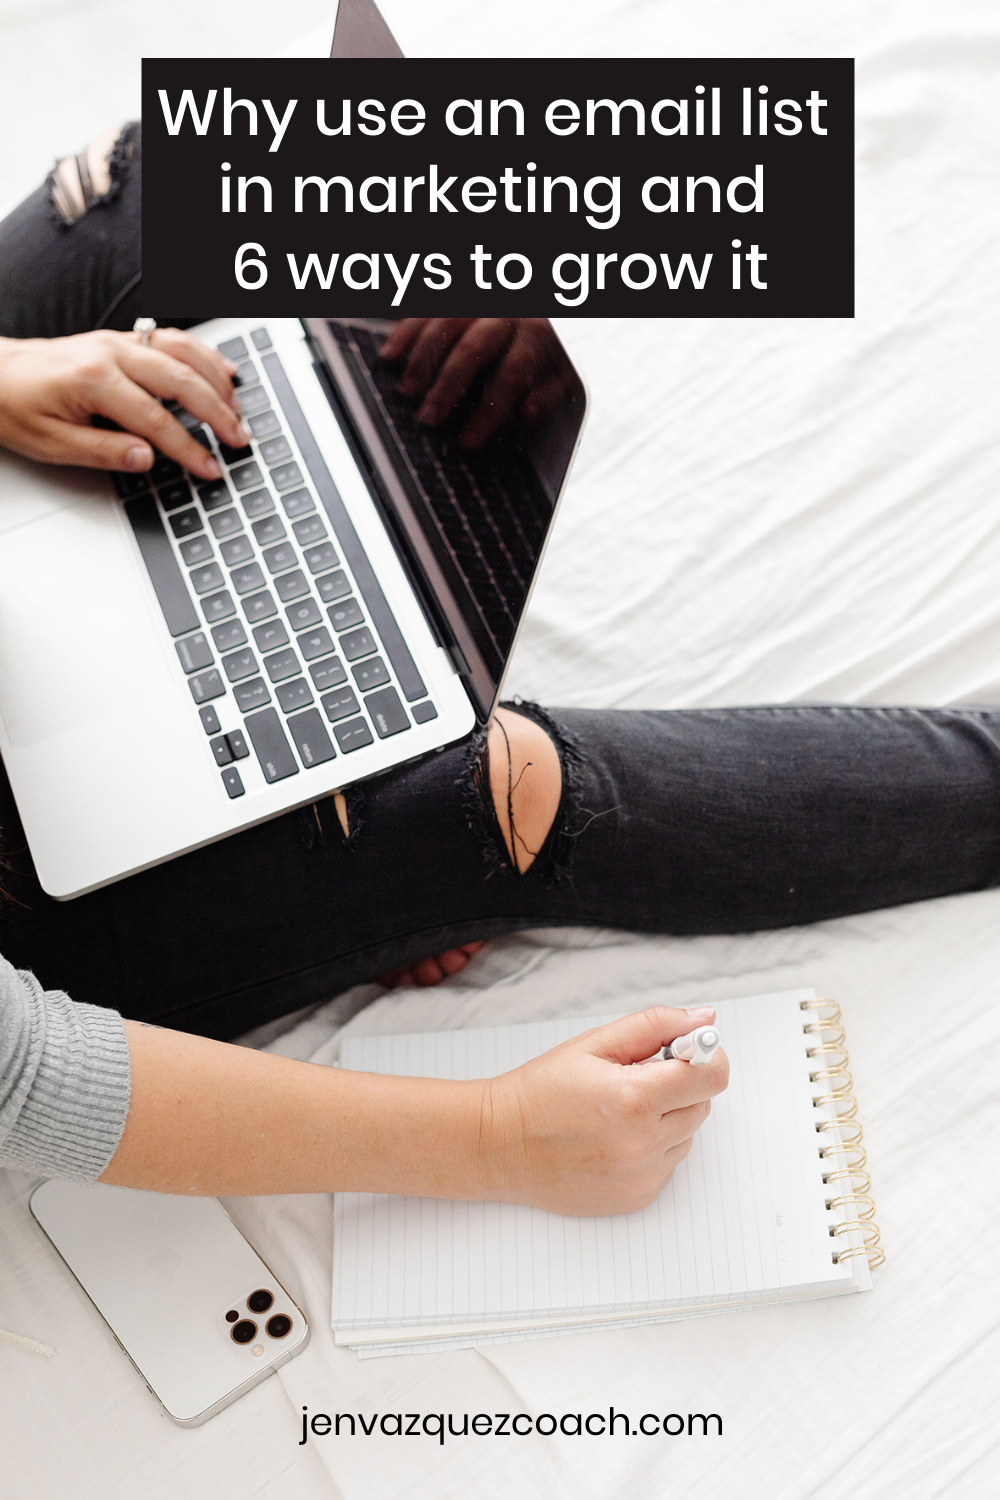 Why you should use an email list in marketing and 6 ways to grow it